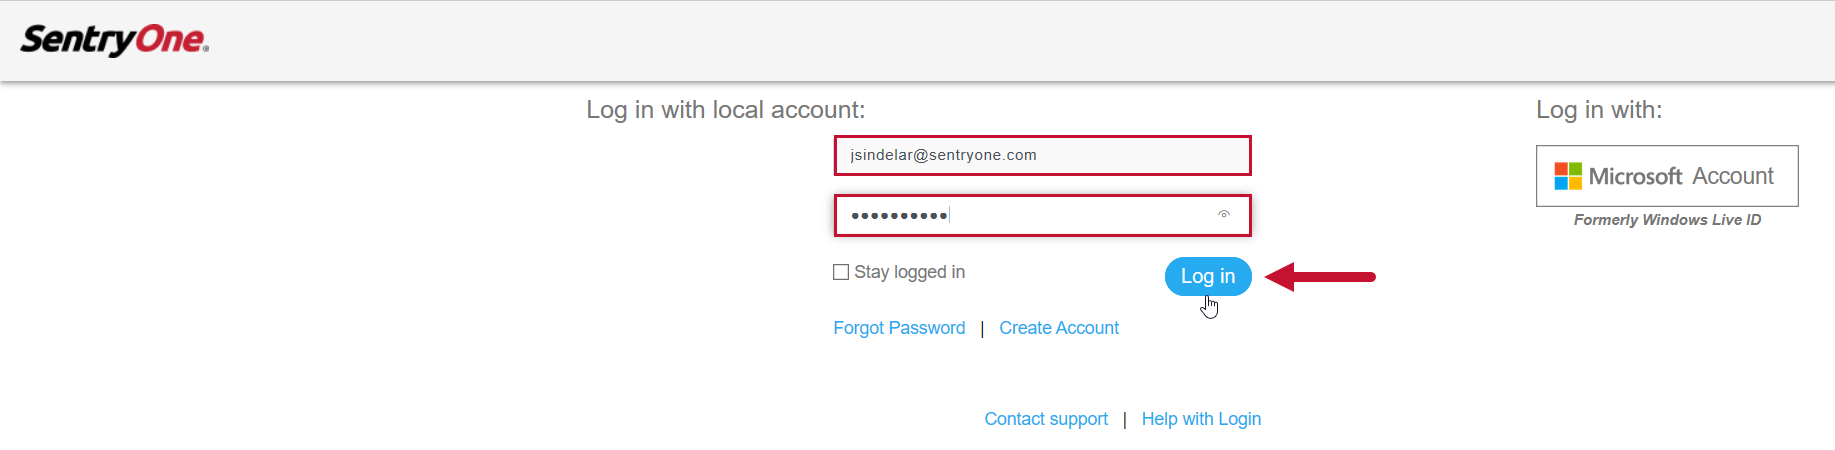 Log in with account displaying an email, jsindelar@sentryone.com, entered password, and highlighting the Log in button.